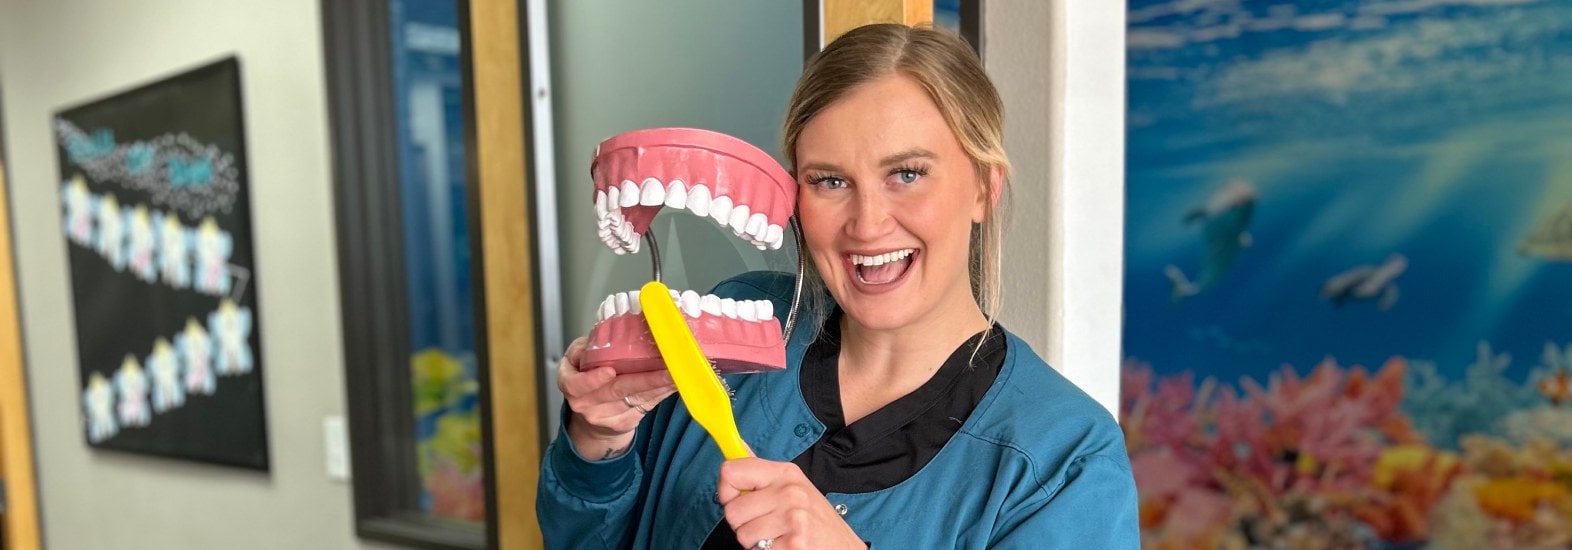 smiling staff member with teeth prop